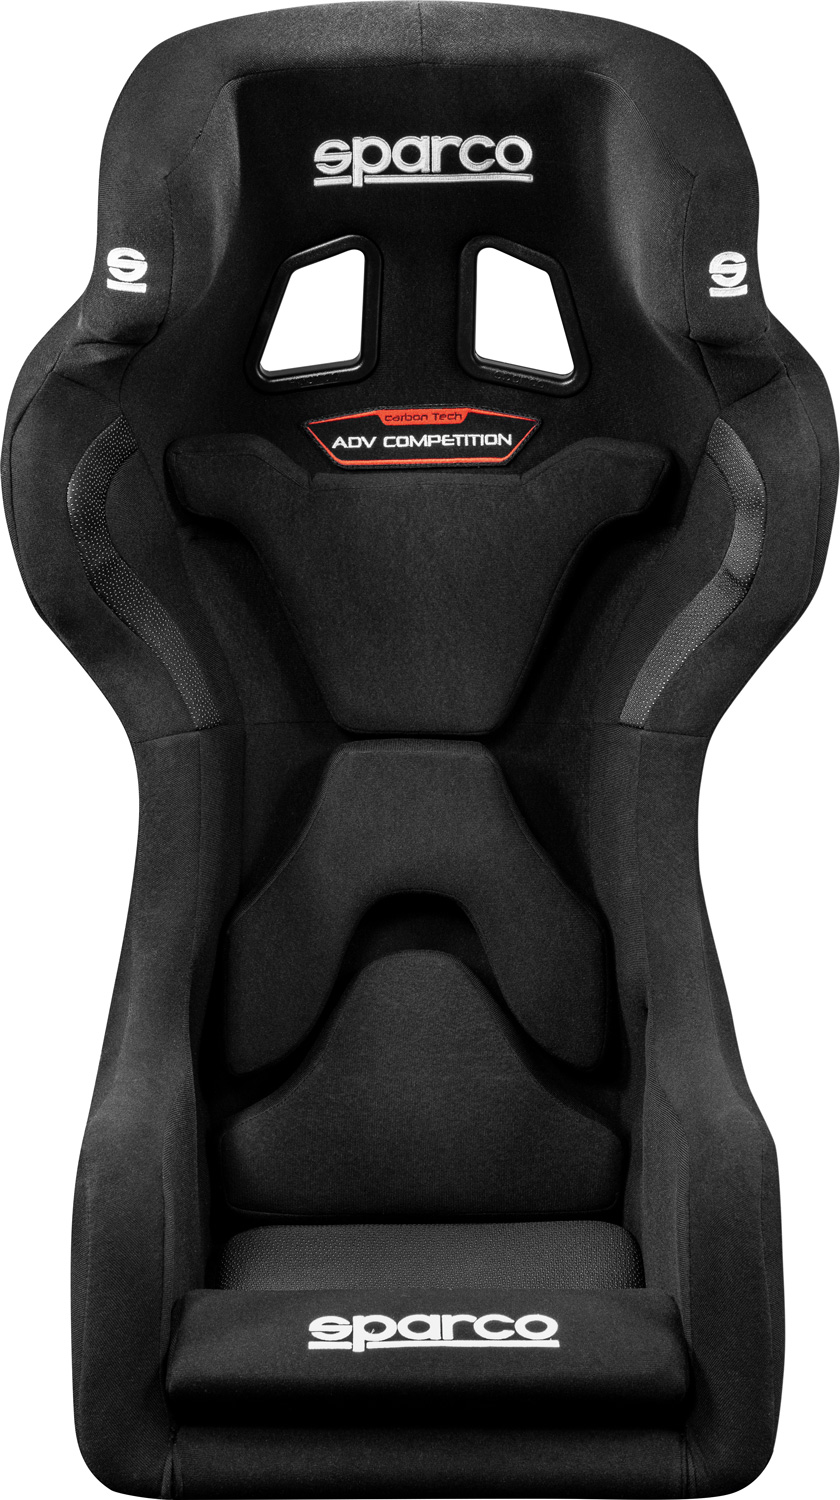 Sparco Rennsitz ADV Competition Pad